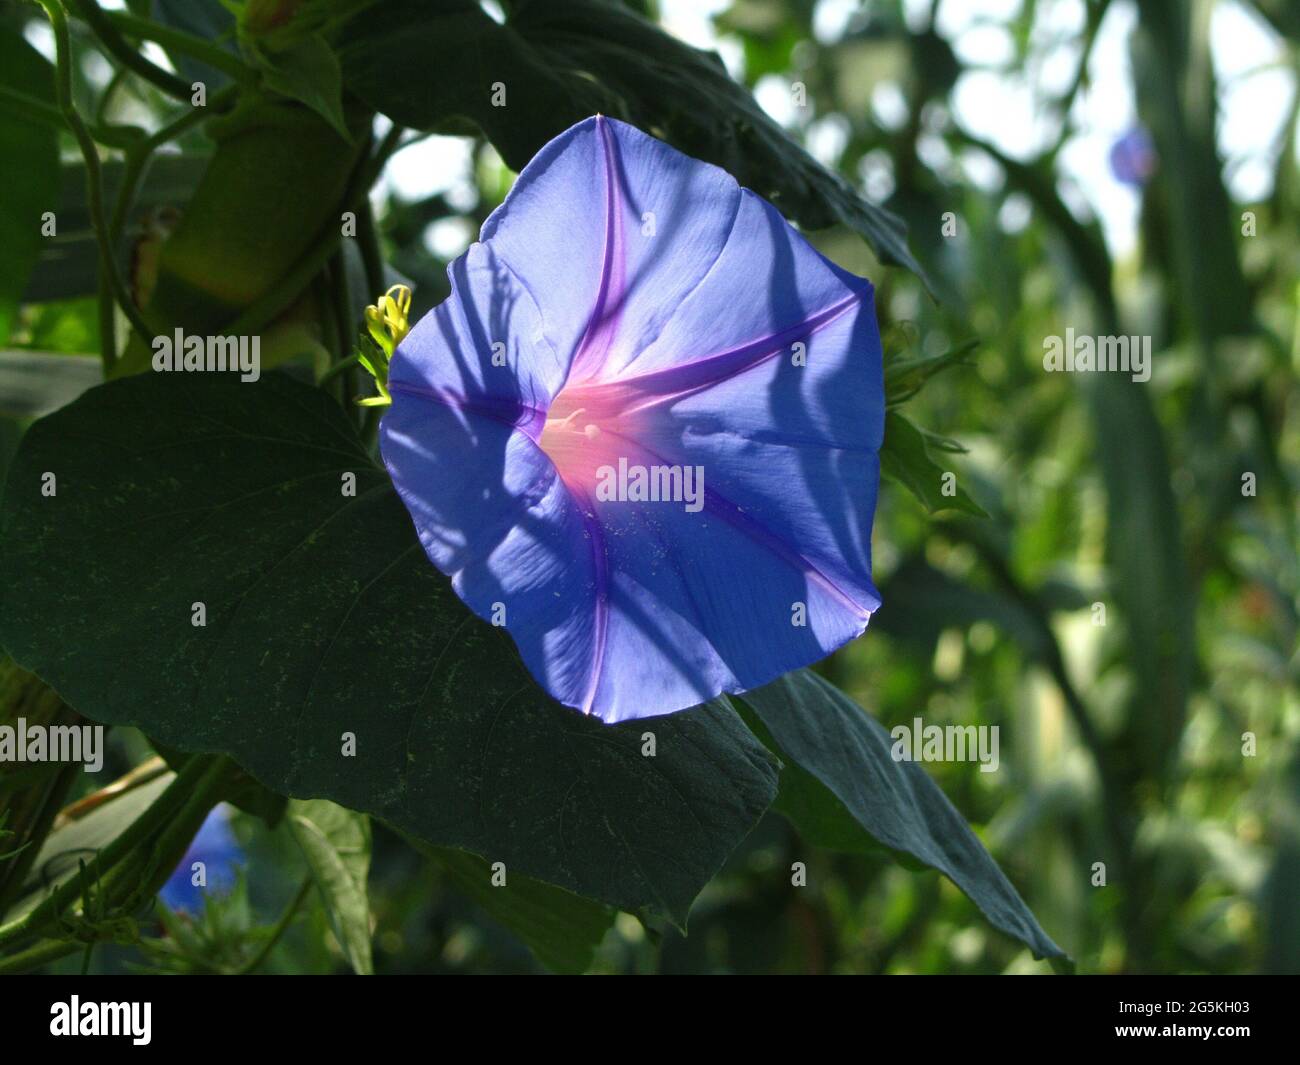 Closeup shot of backlit ocean blue morning glory flower, Ipomoea indica in the garden Stock Photo